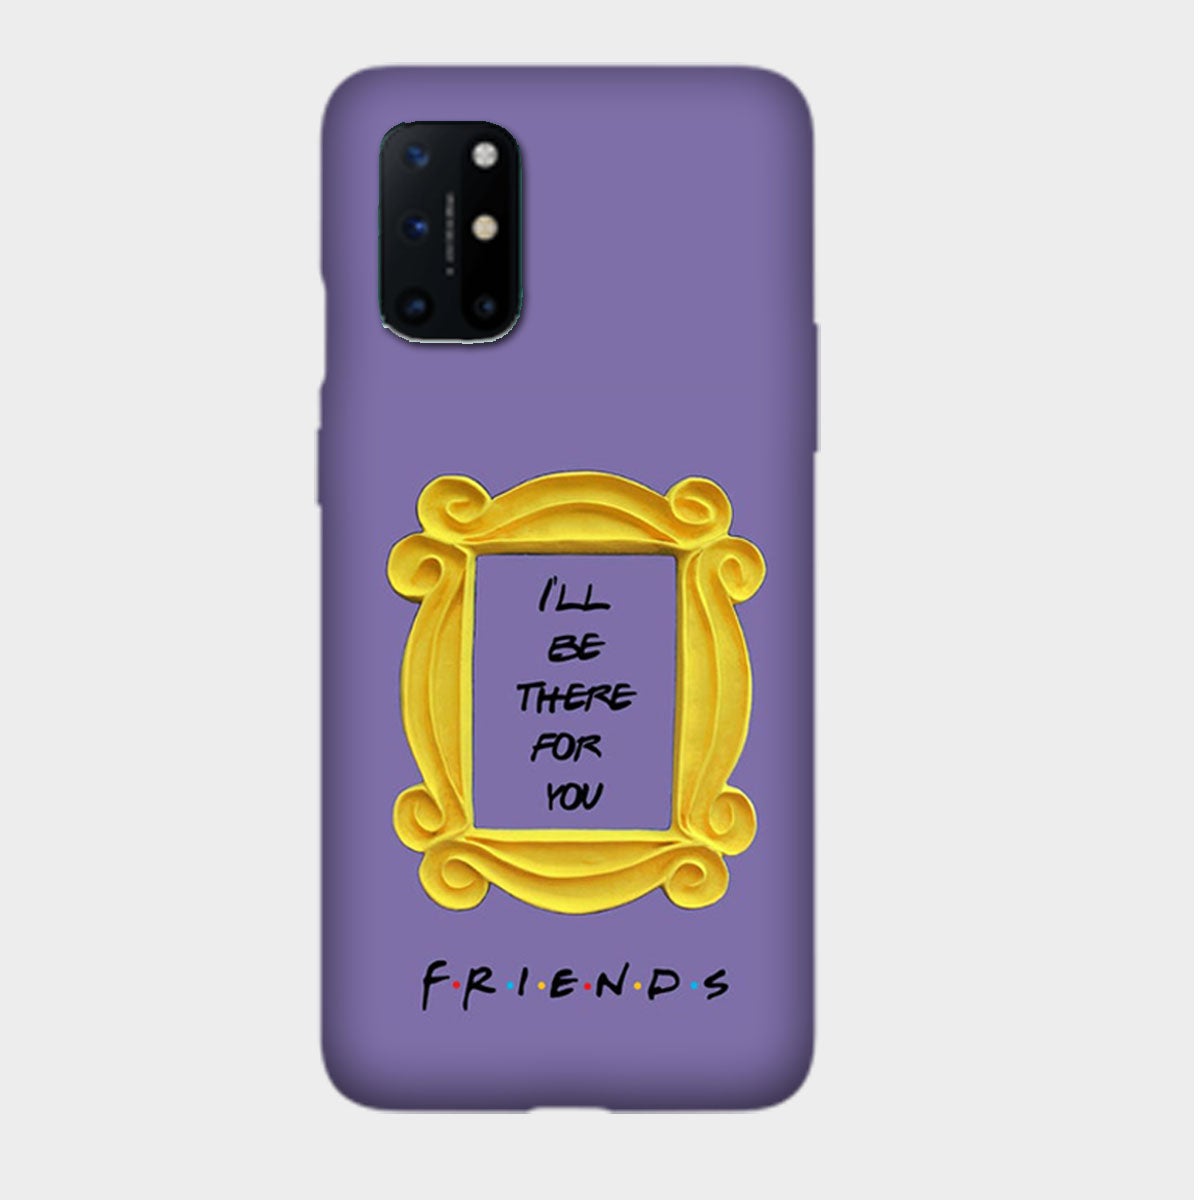 Friends - Frame - I'll be There for You - Mobile Phone Cover - Hard Case - OnePlus